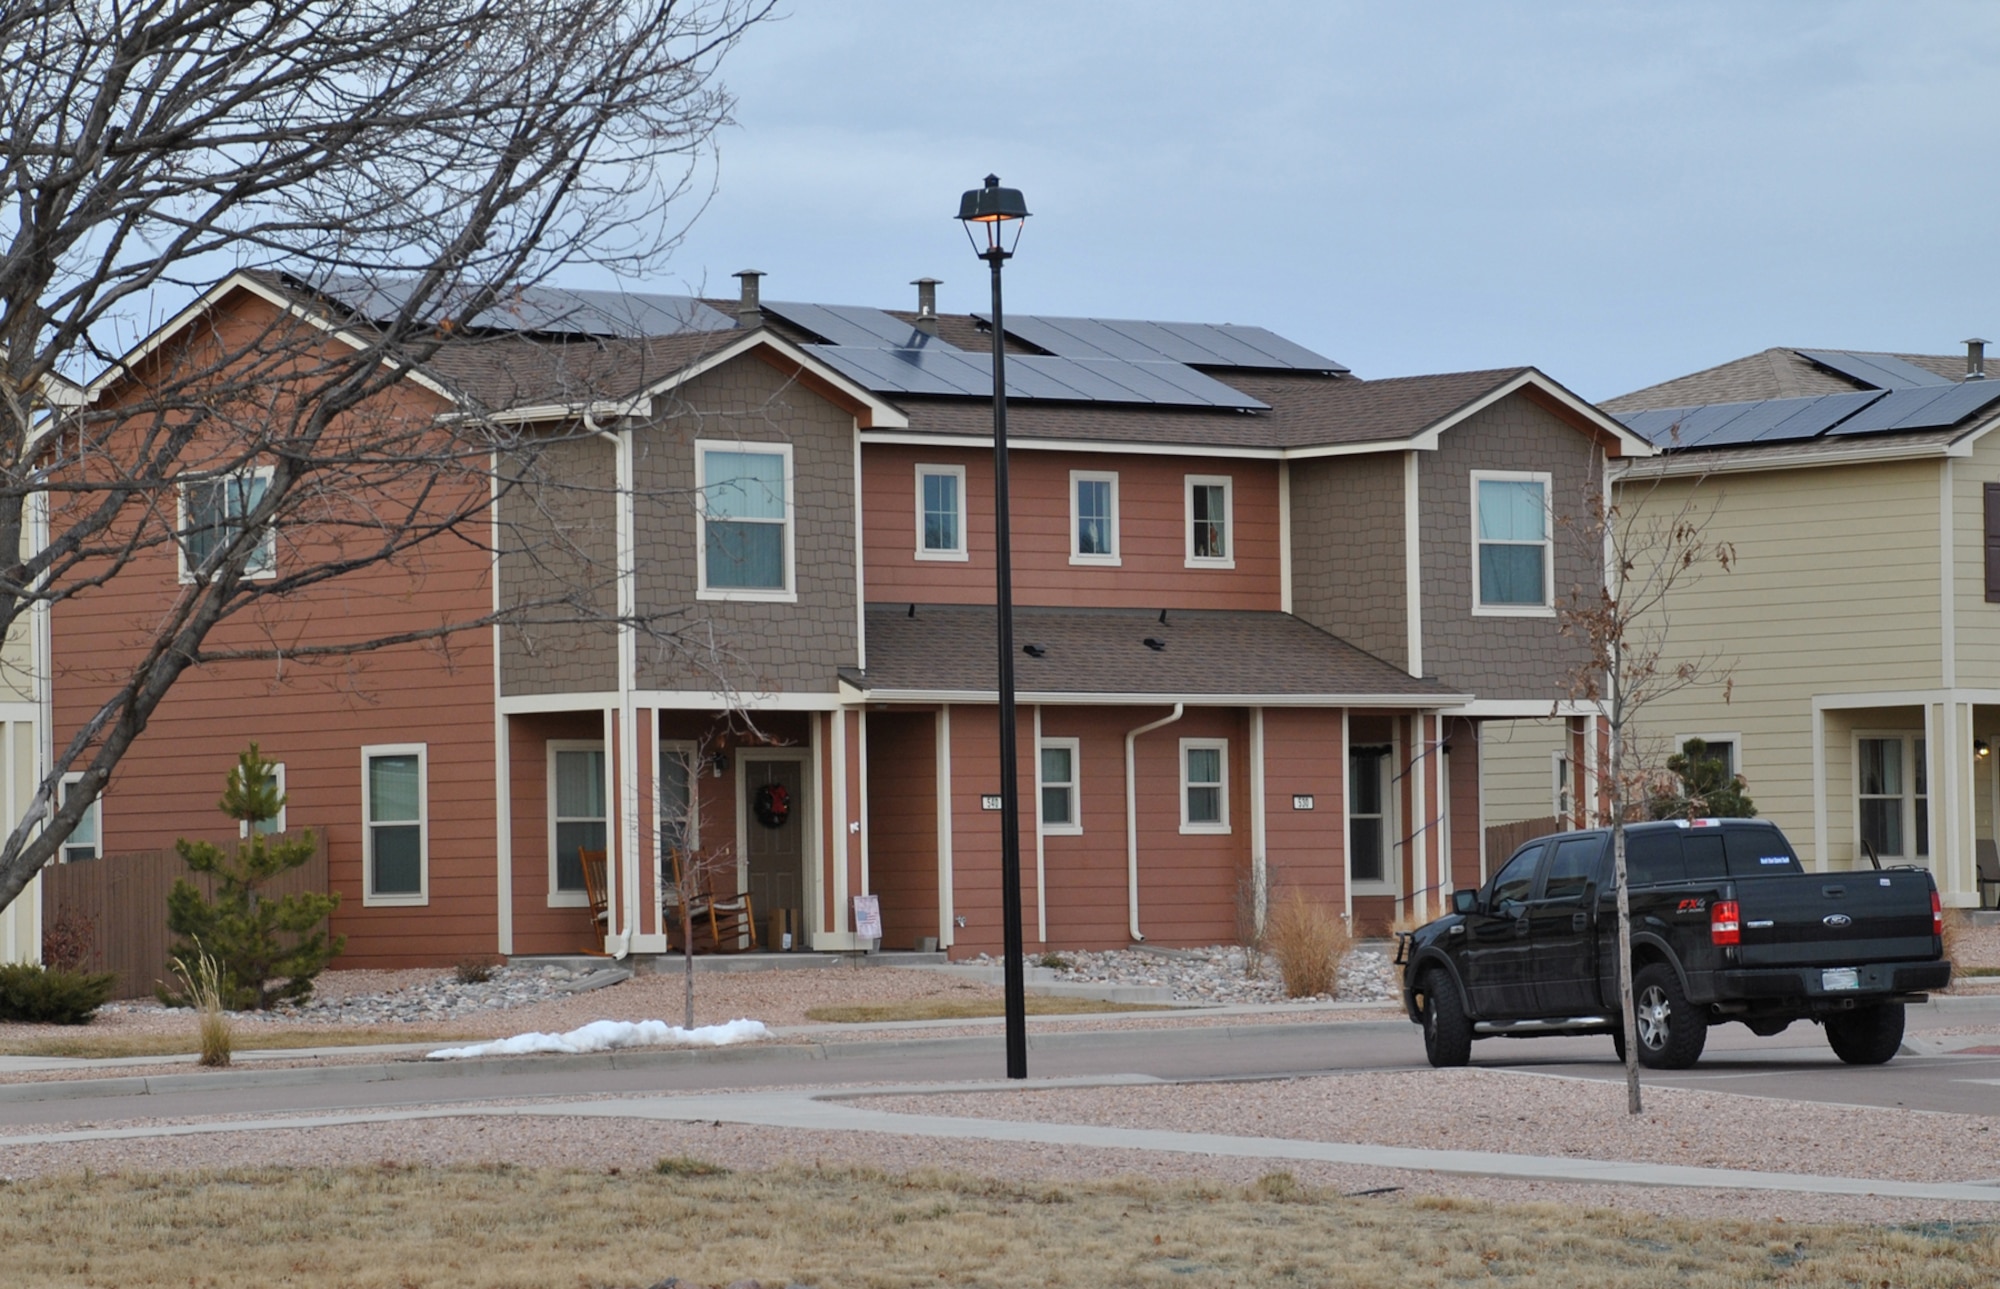 Housing at Peterson Air Force Base, Colorado, features rooftop solar panels. The homes are part of the Air Force Housing Privatization program portfolio. The Air Force Civil Engineer Center manages the program. (U.S. Air Force photo/Carole Chiles Fuller)